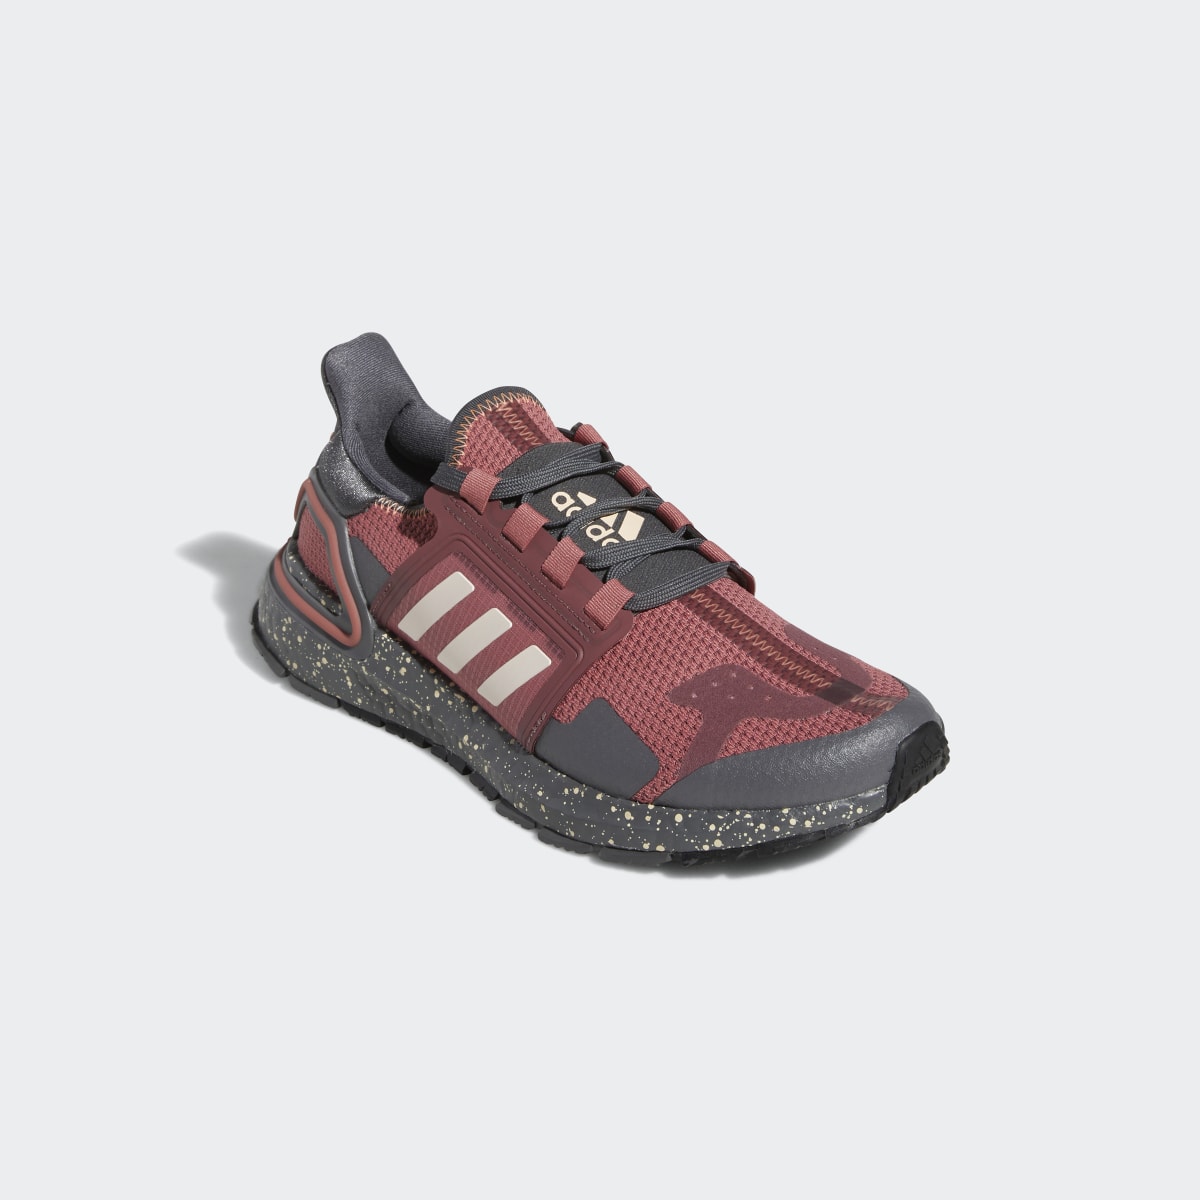 Adidas Ultraboost DNA City Explorer Outdoor Trail Running Sportswear Lifestyle Shoes. 5